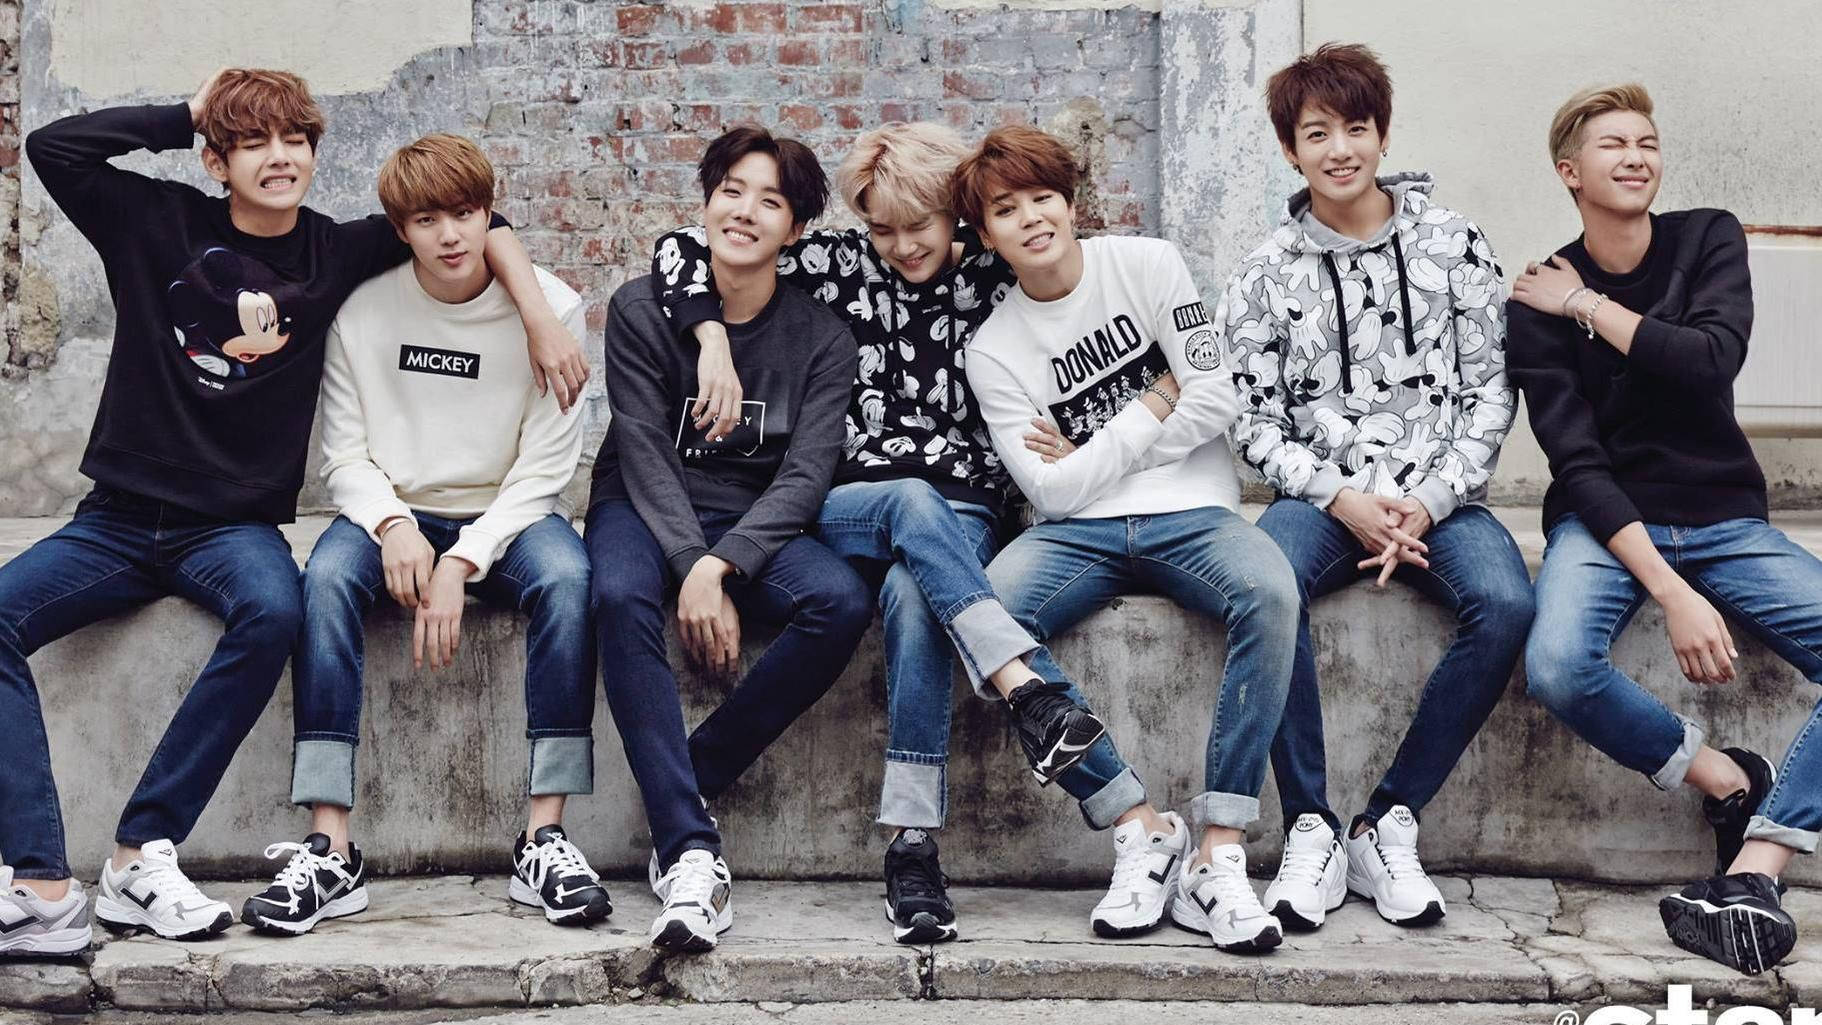 Bts 2020 Seated On Concrete Bench Background